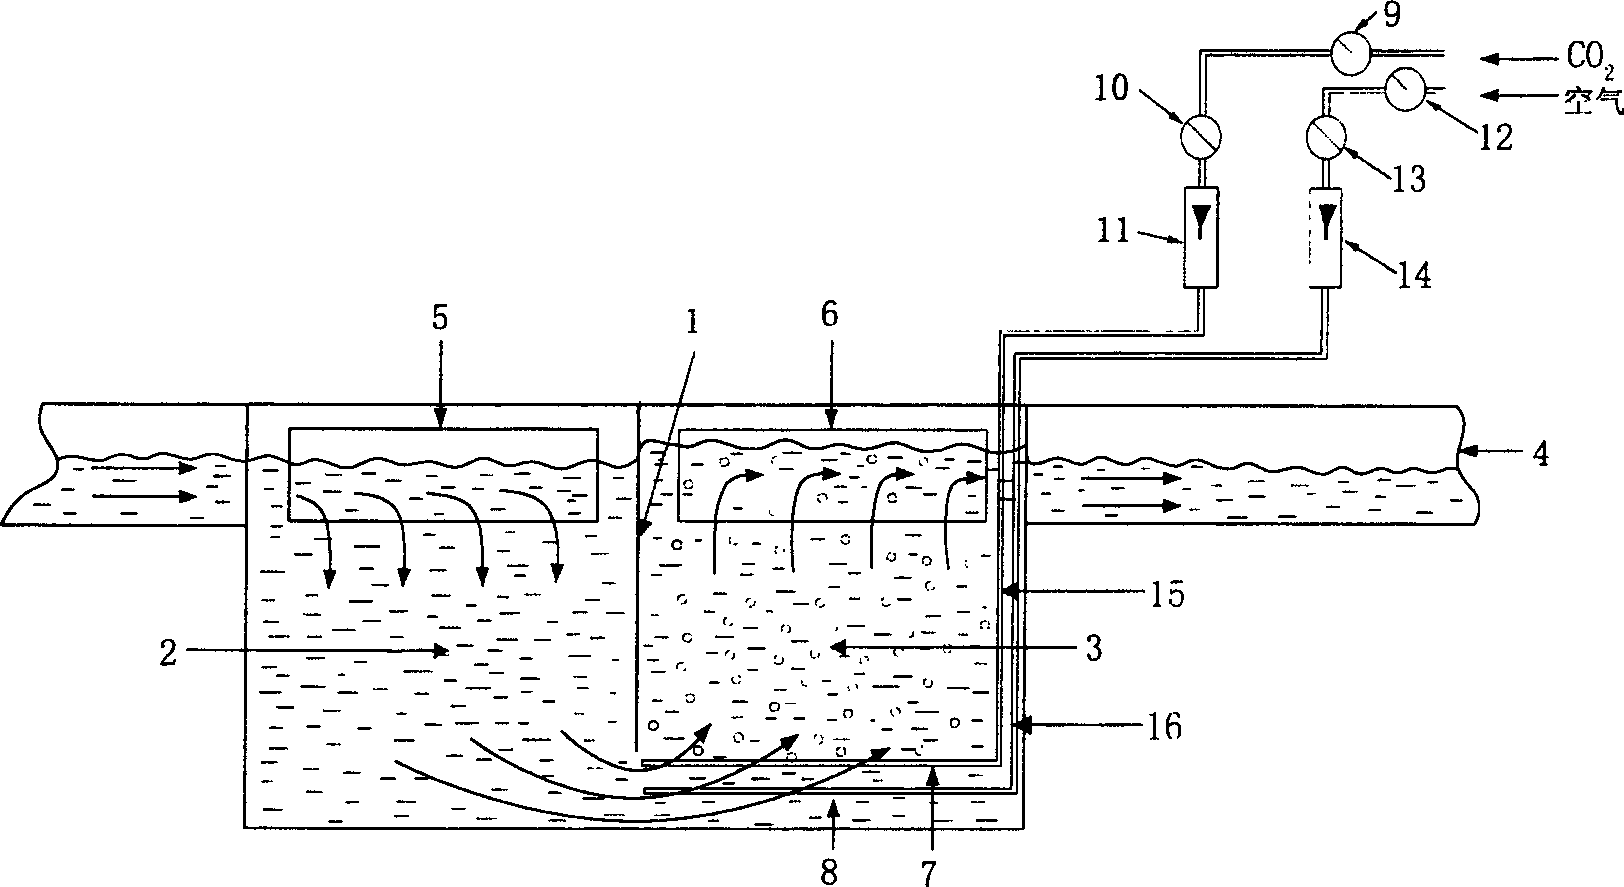 Arrangement for supplementing CO2 to micro-algae culture pond